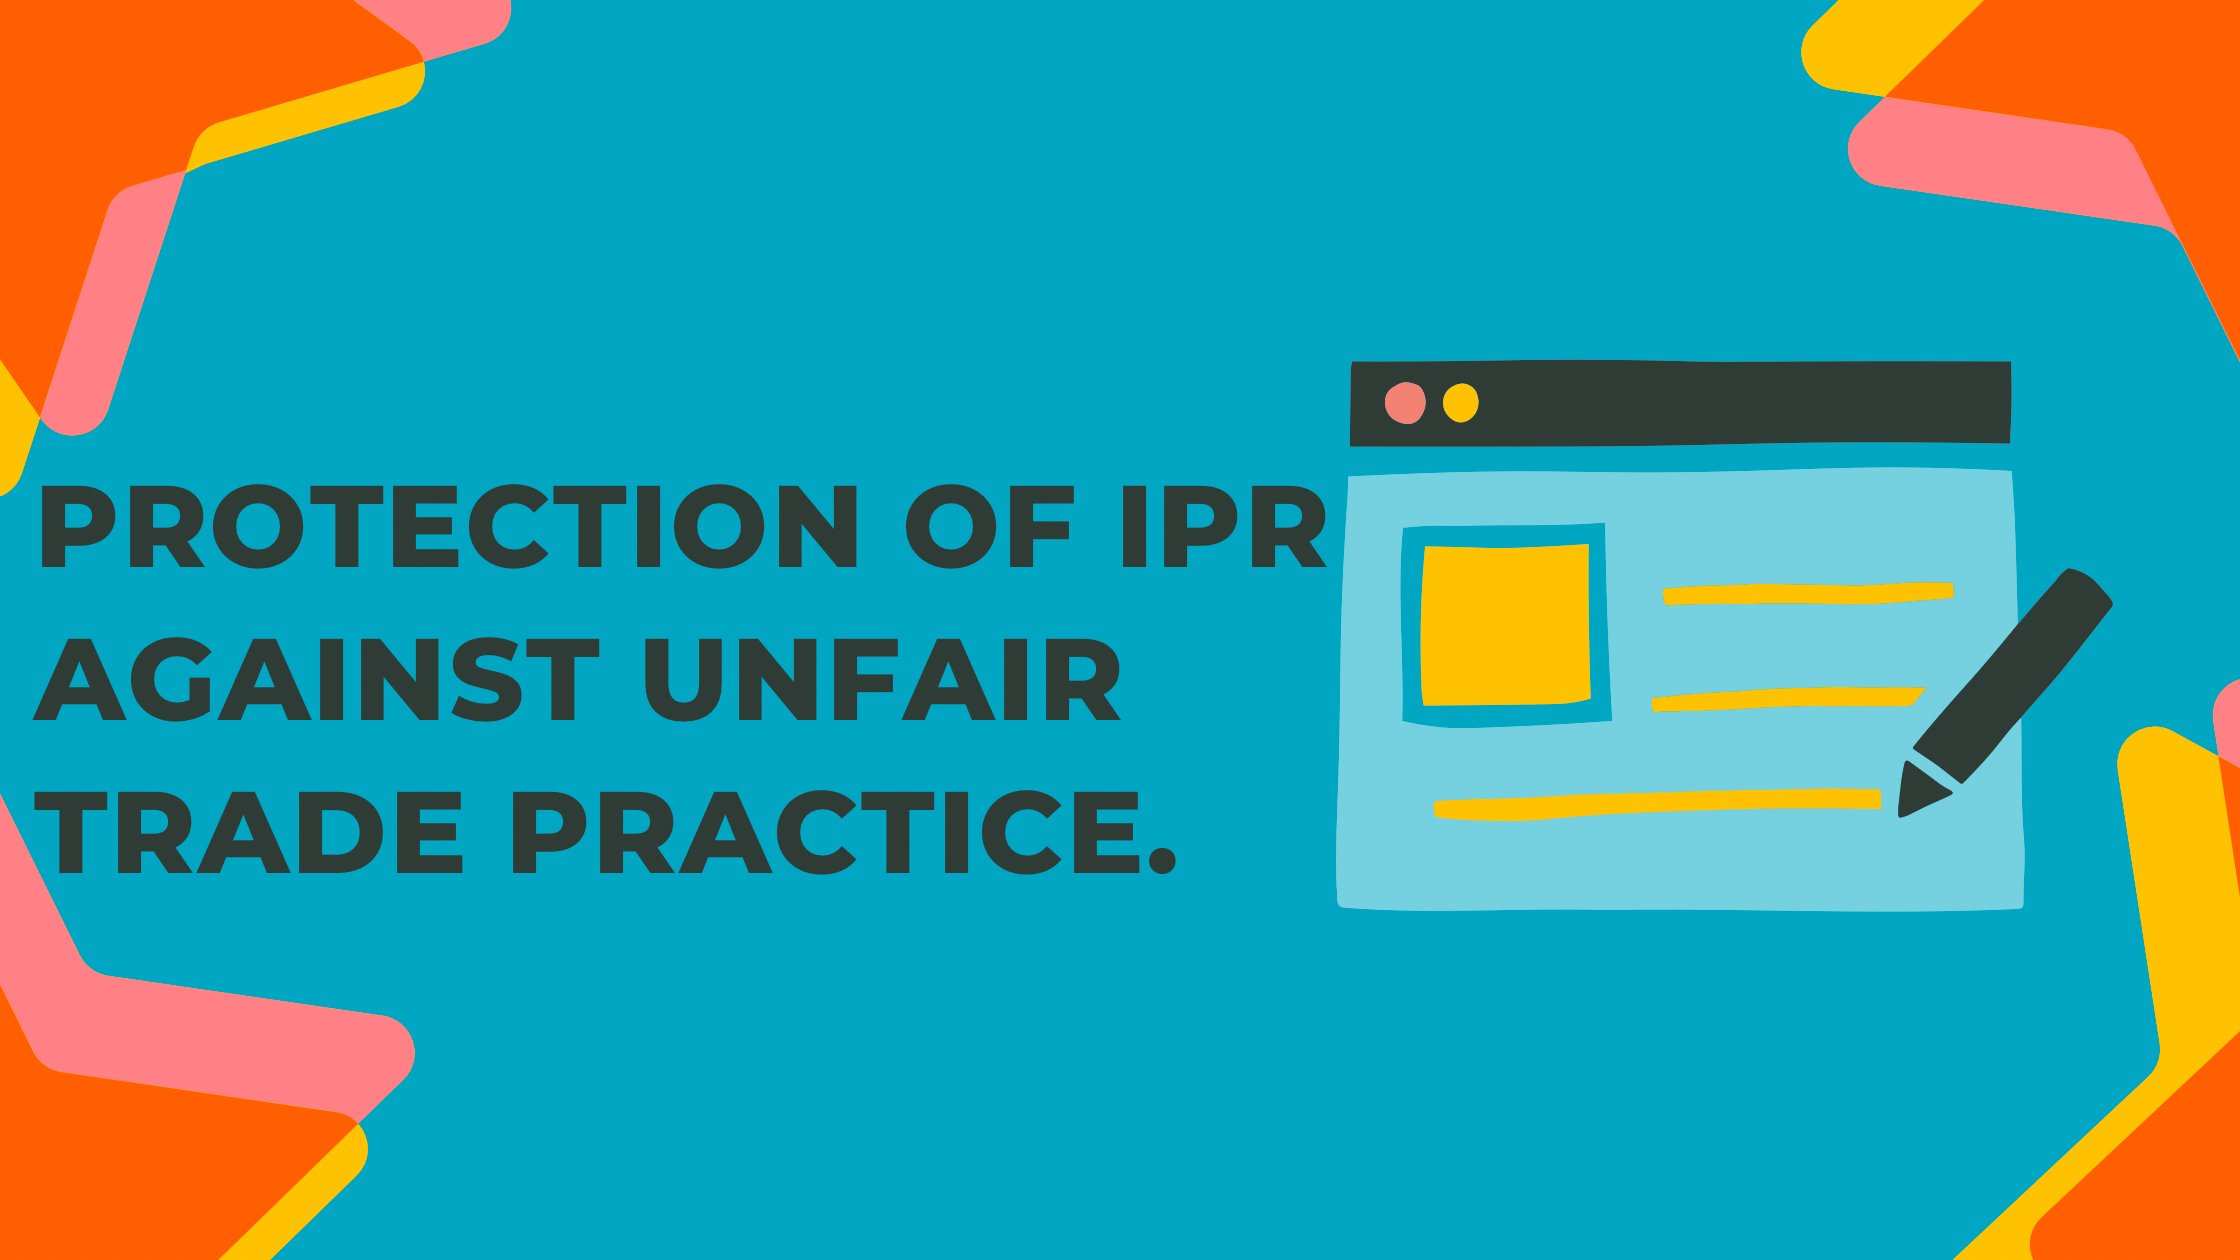 PROTECTION OF IPR AGAINST UNFAIR TRADE PRACTICE.